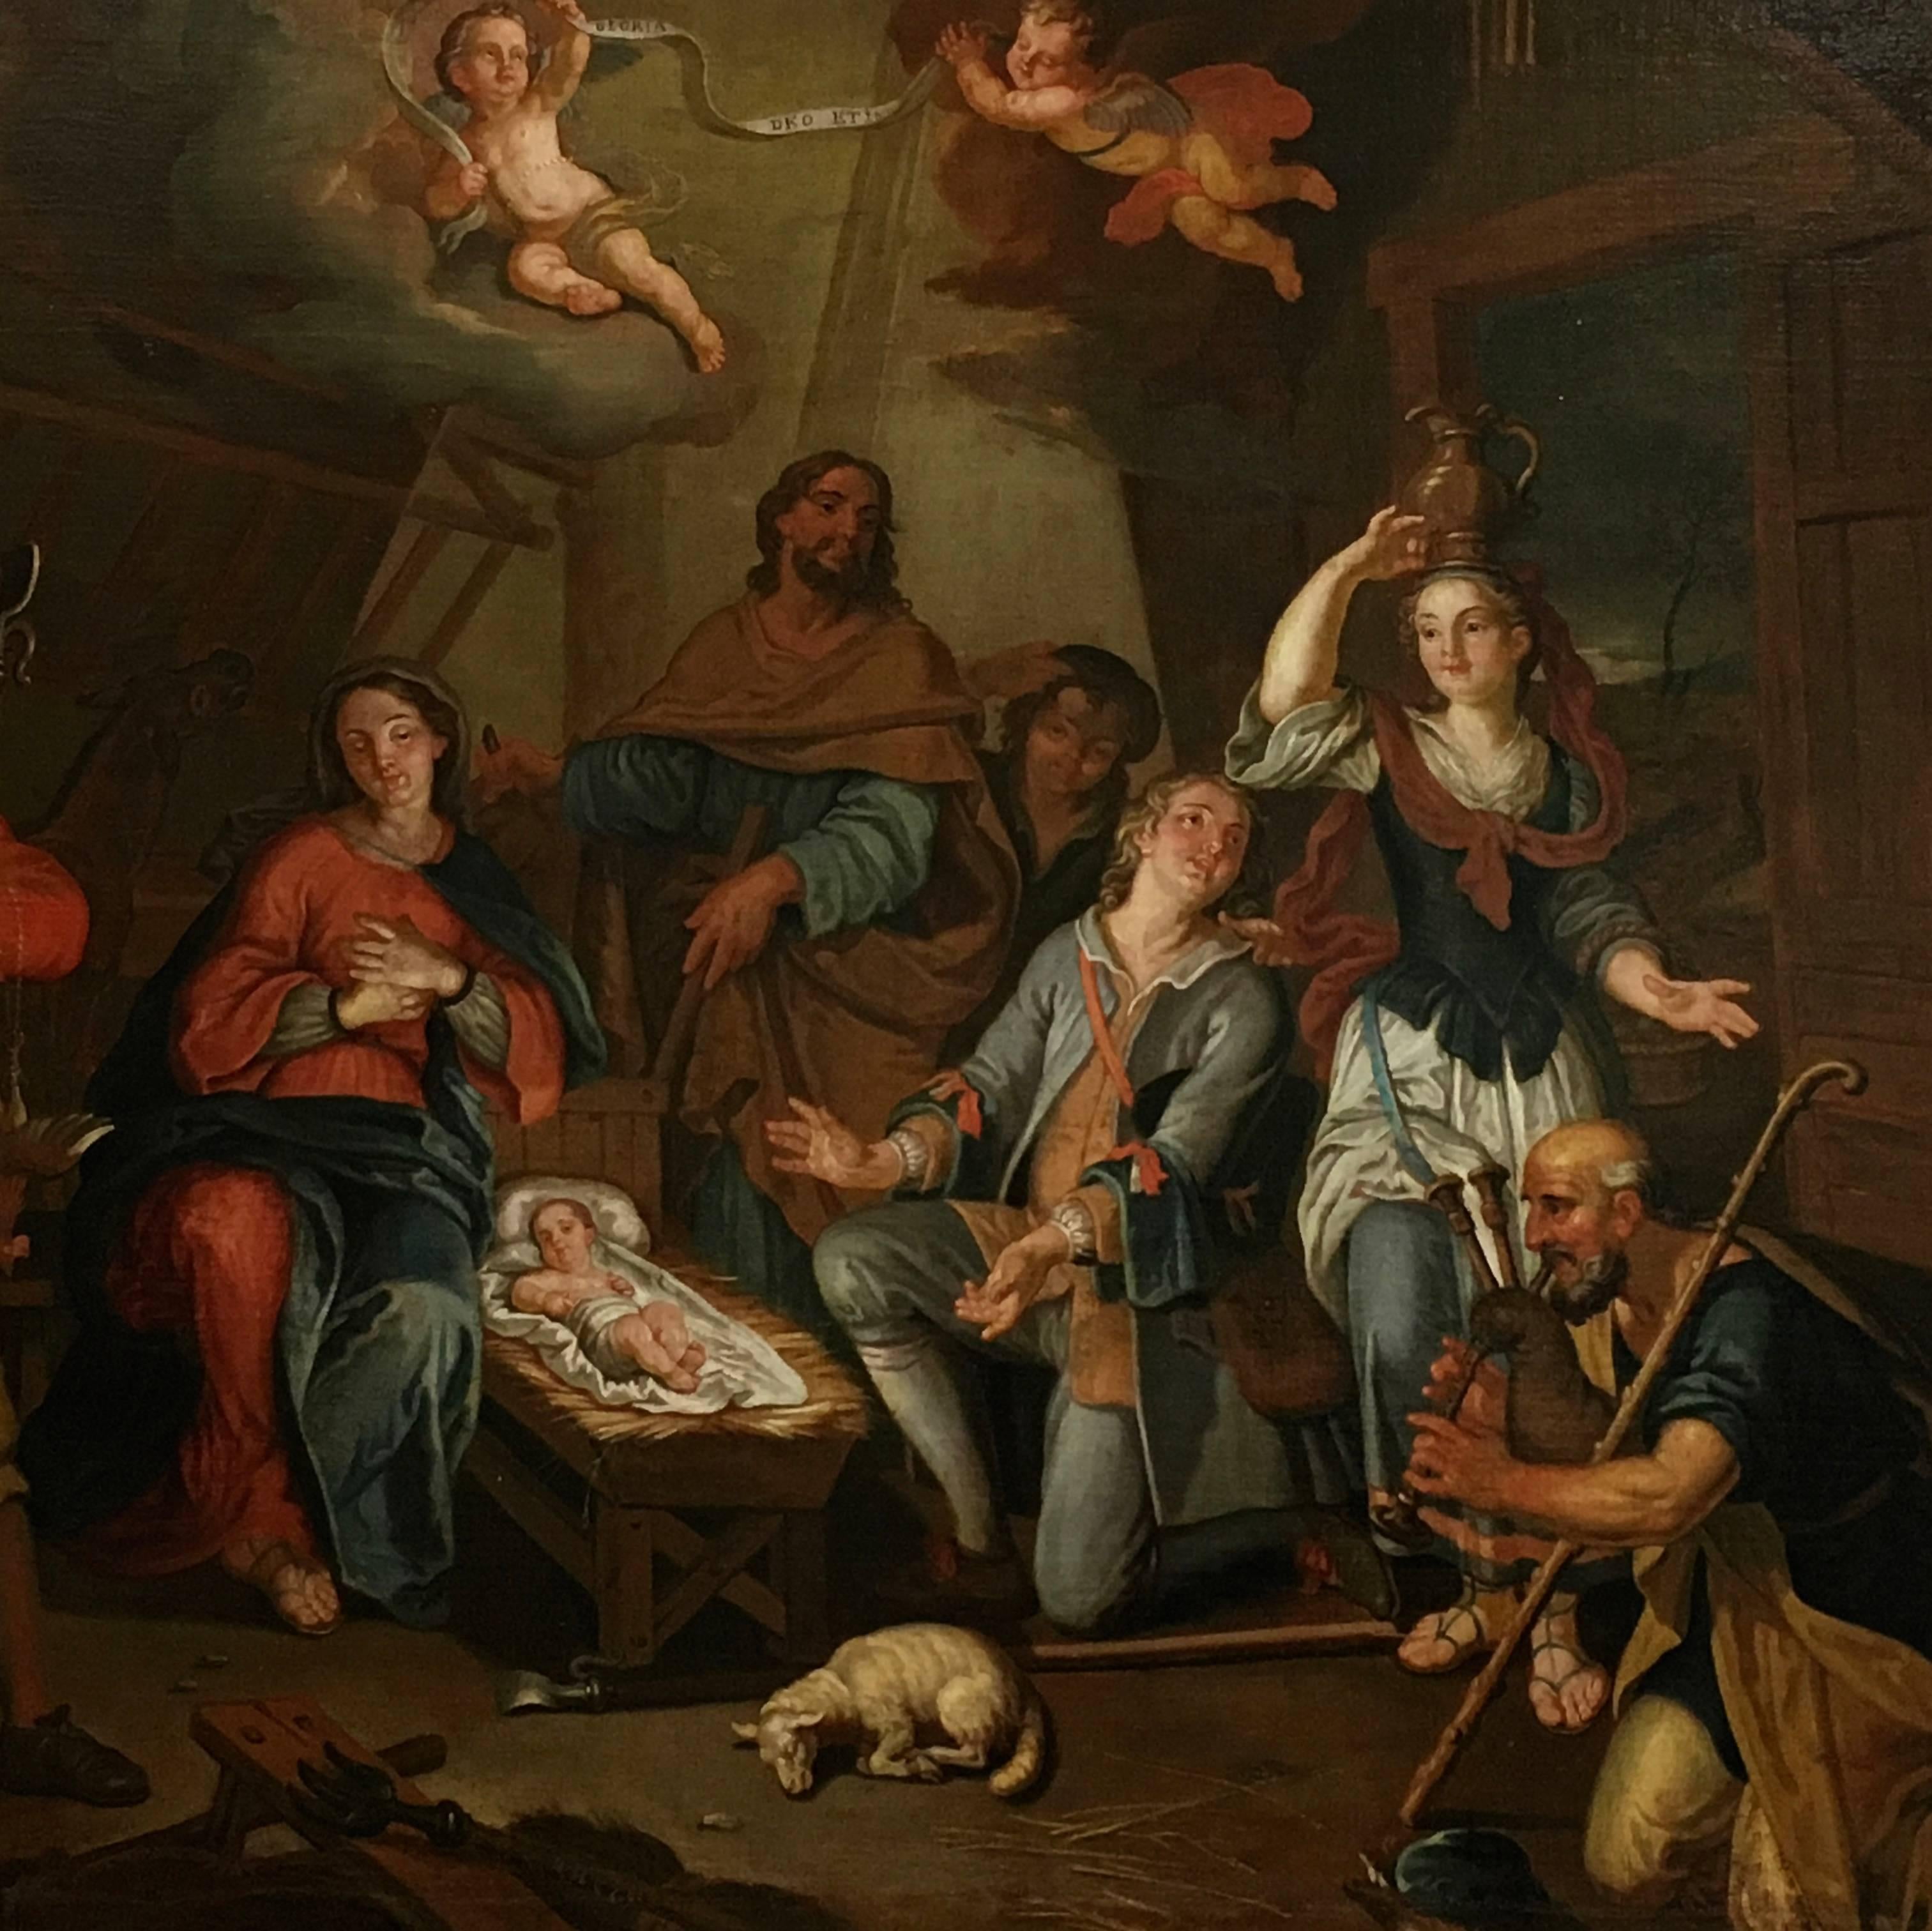 Original antique Dutch Painting, Oil on canvas. Quirinus van Amelsfoort painted the birth of Jesus Christ. 
Typical for Quirinus van Amelsfoort was his signatuur. On paintings he painted himself he engraved his signature into the paint. As seen on